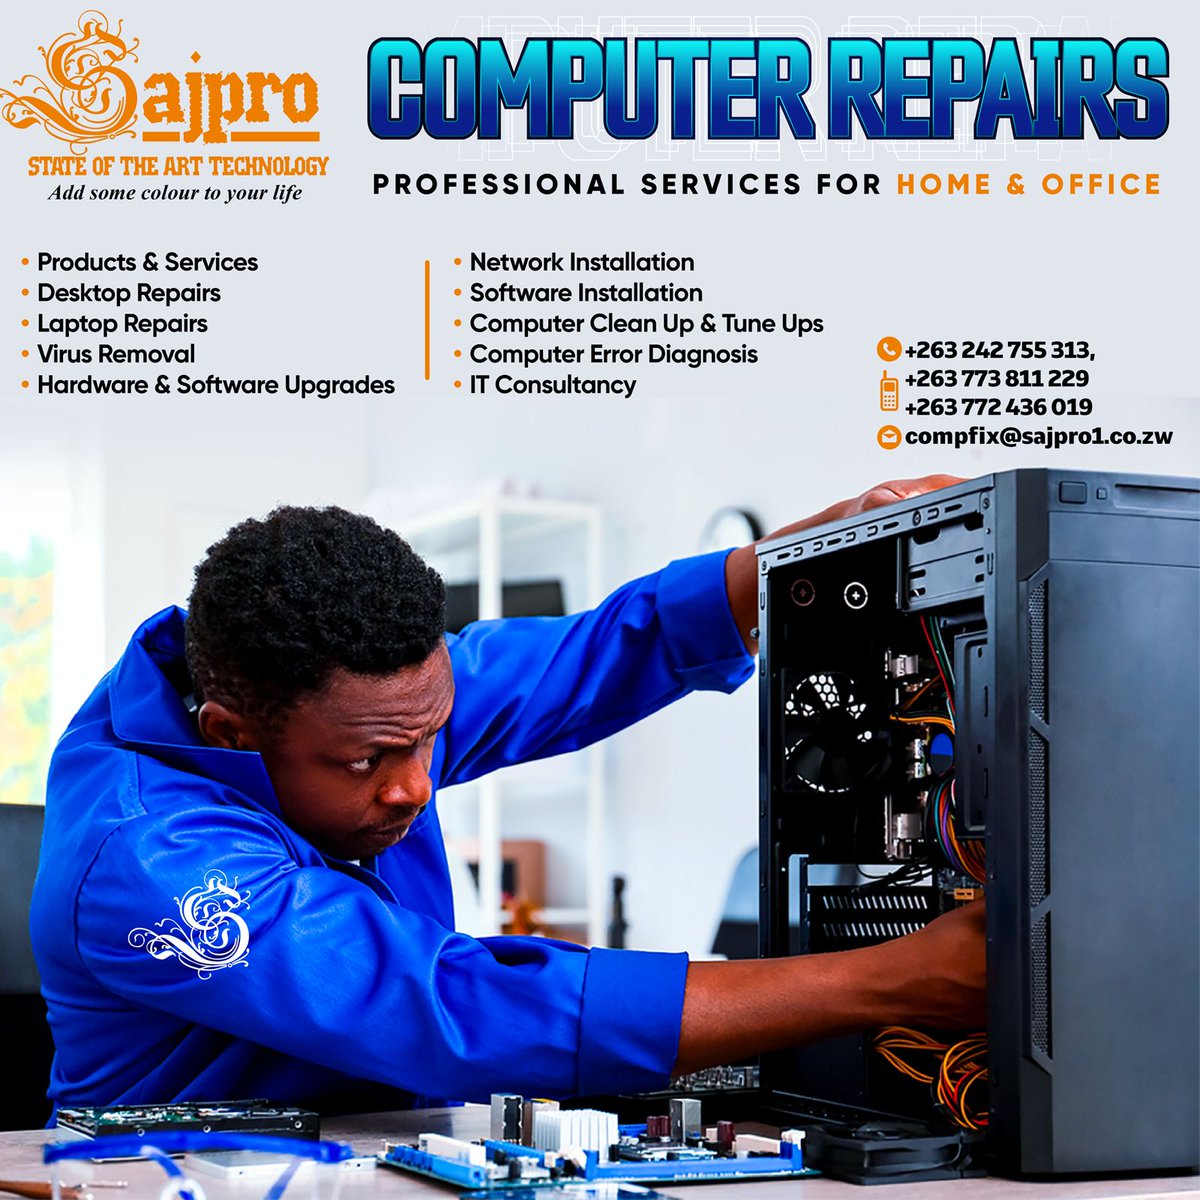 Sajpro provides high-quality computer repair service and solutions that are reasonably priced. We offer a wide range of tech solutions designed and packaged to cater for both Home and office. Let us help you with our services today!!!!
#computerrepair #software…